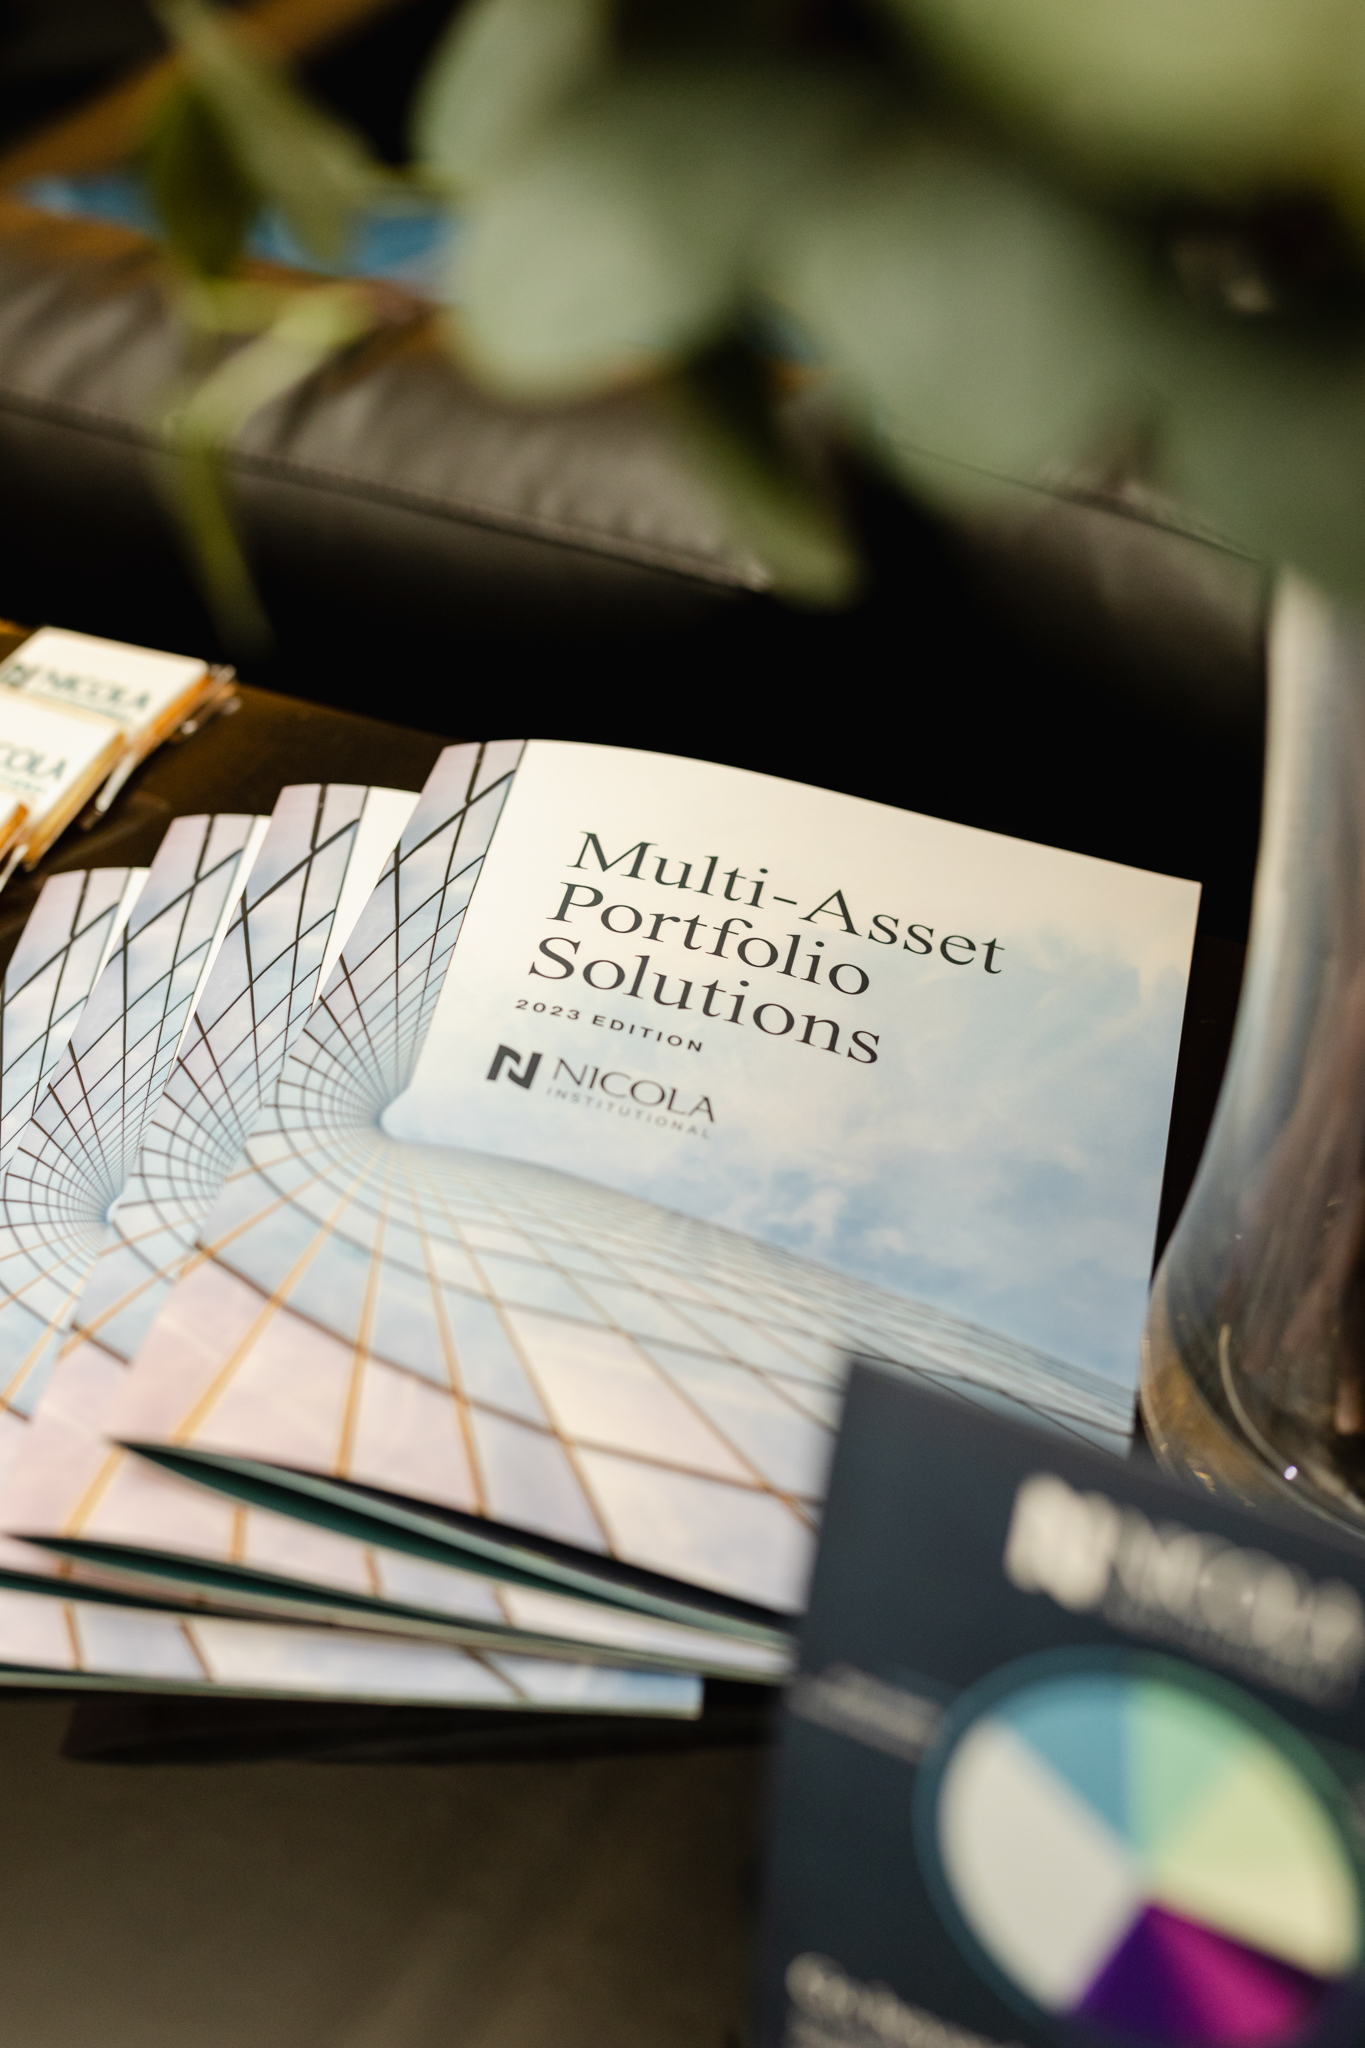 Multi-asset portfolio solutions brochures on a conference table.